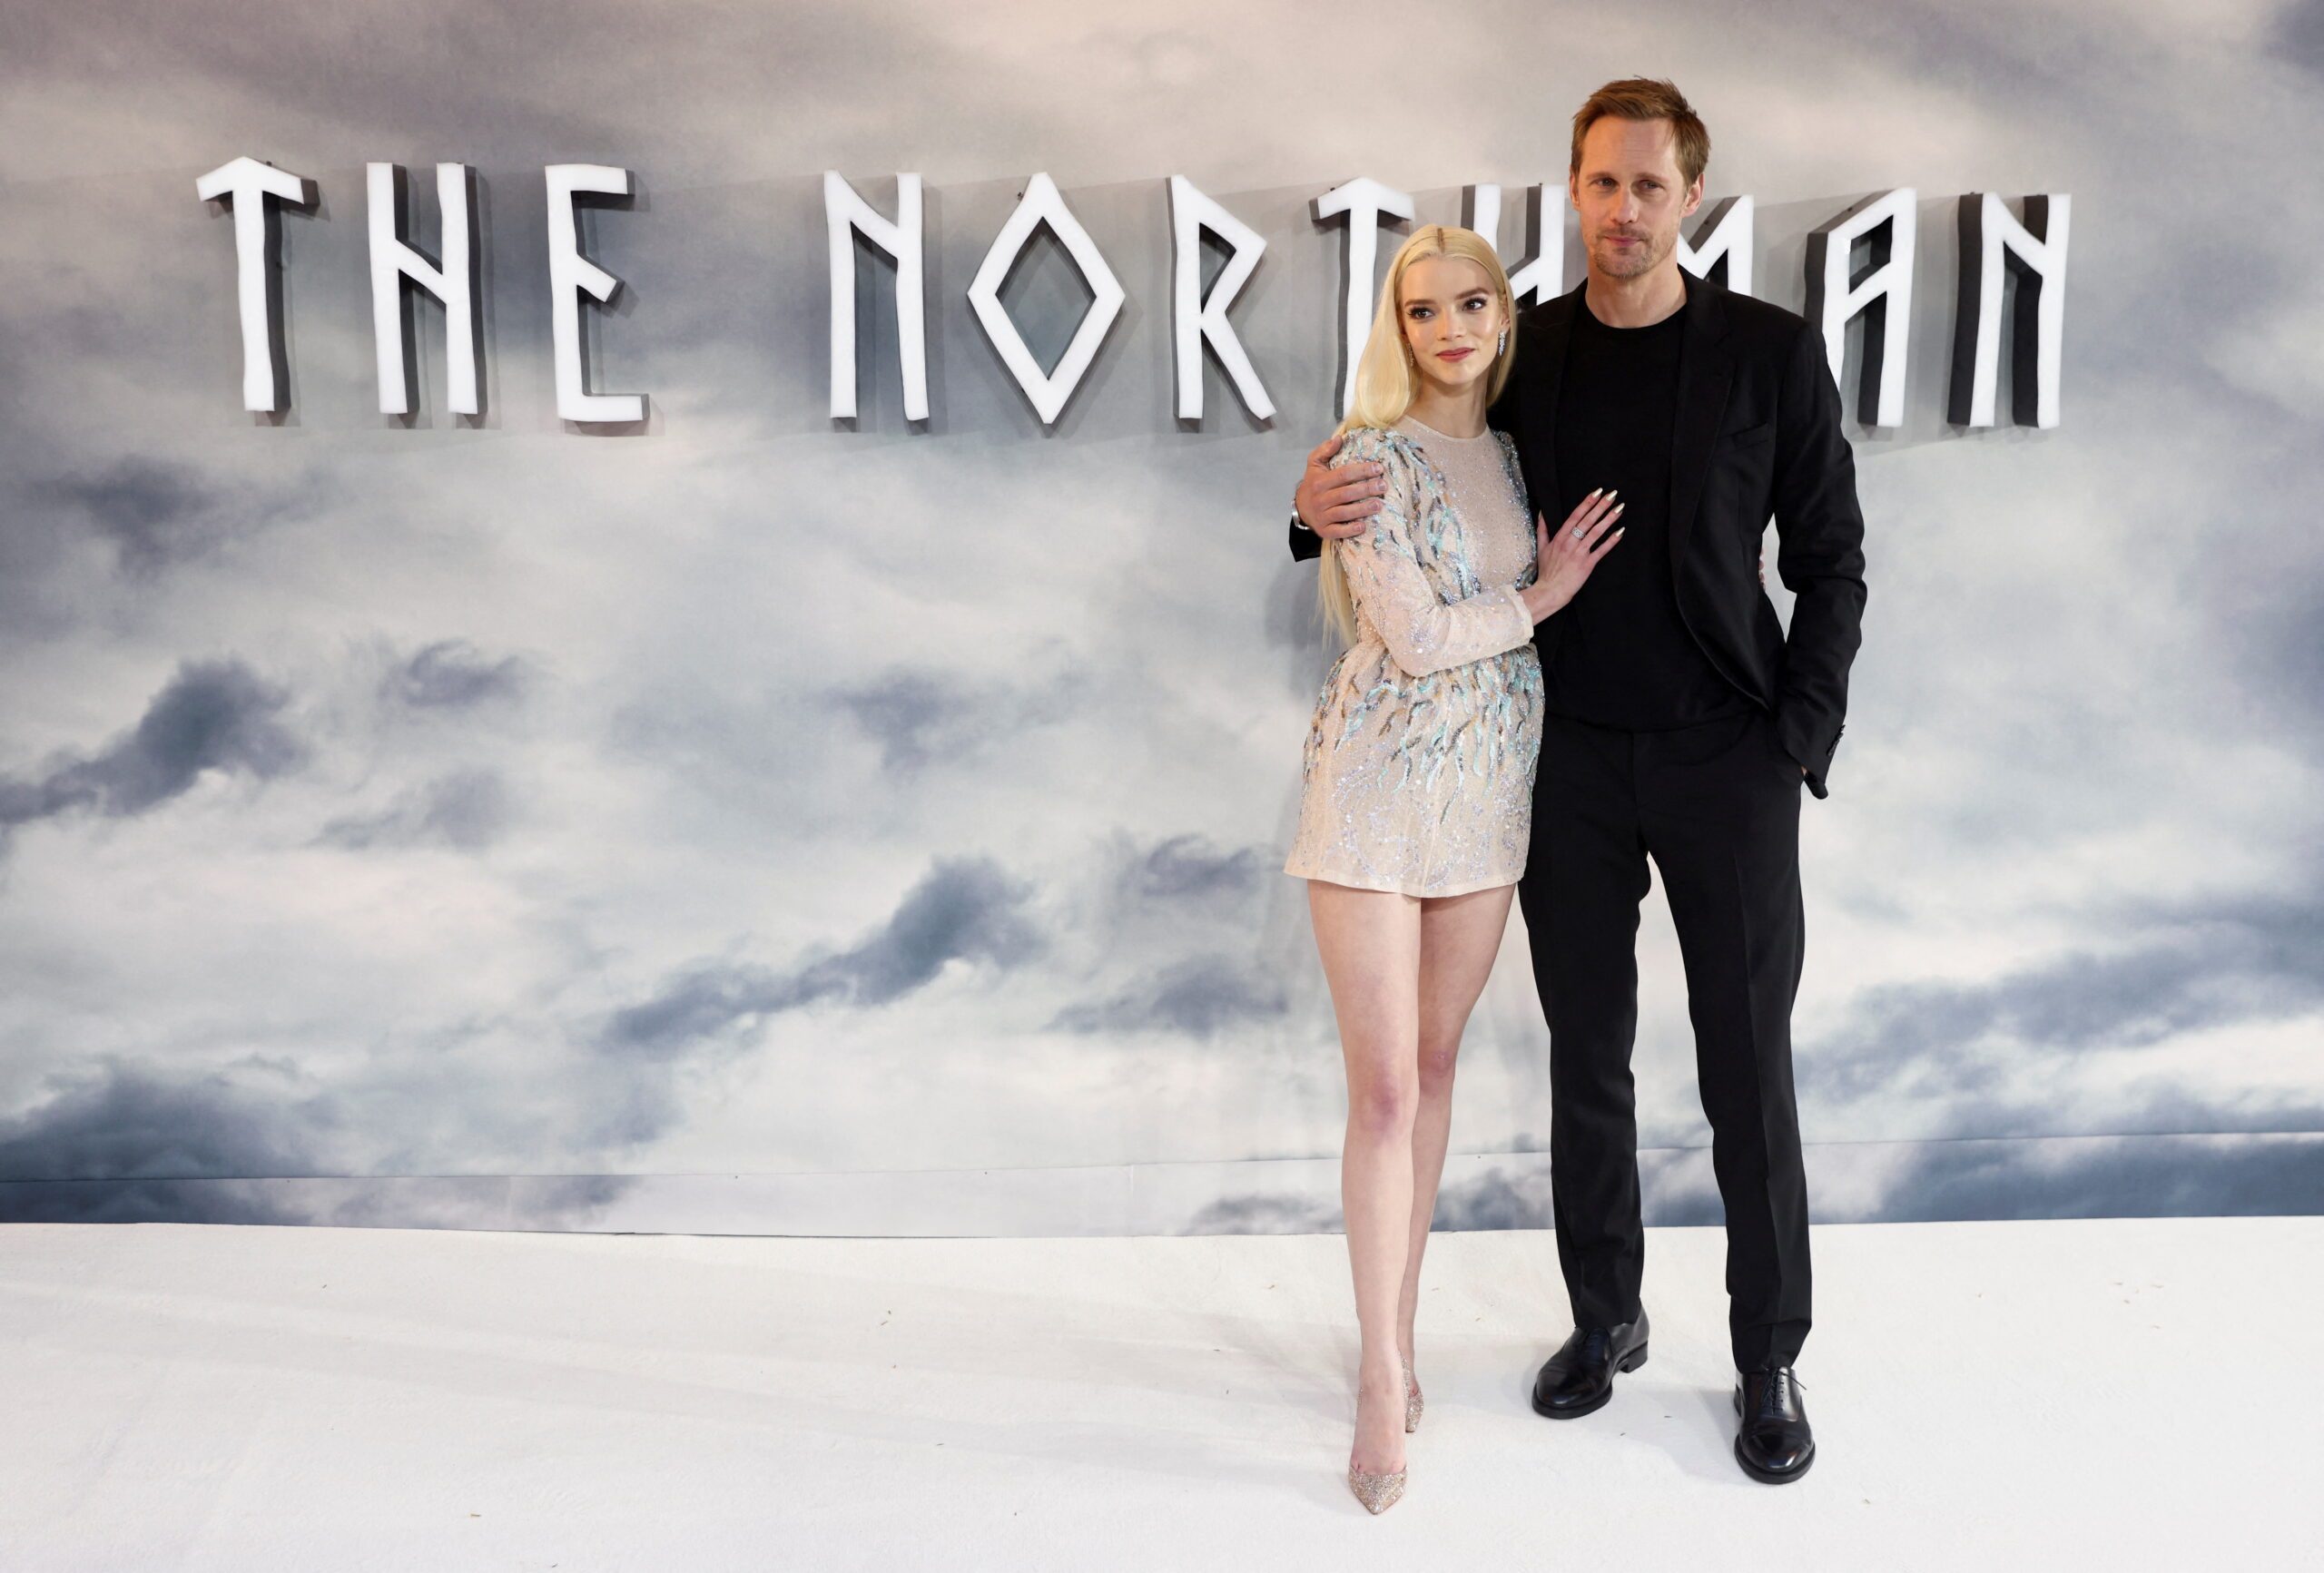 ‘The Northman’ aims to tell Viking tale with accuracy and action